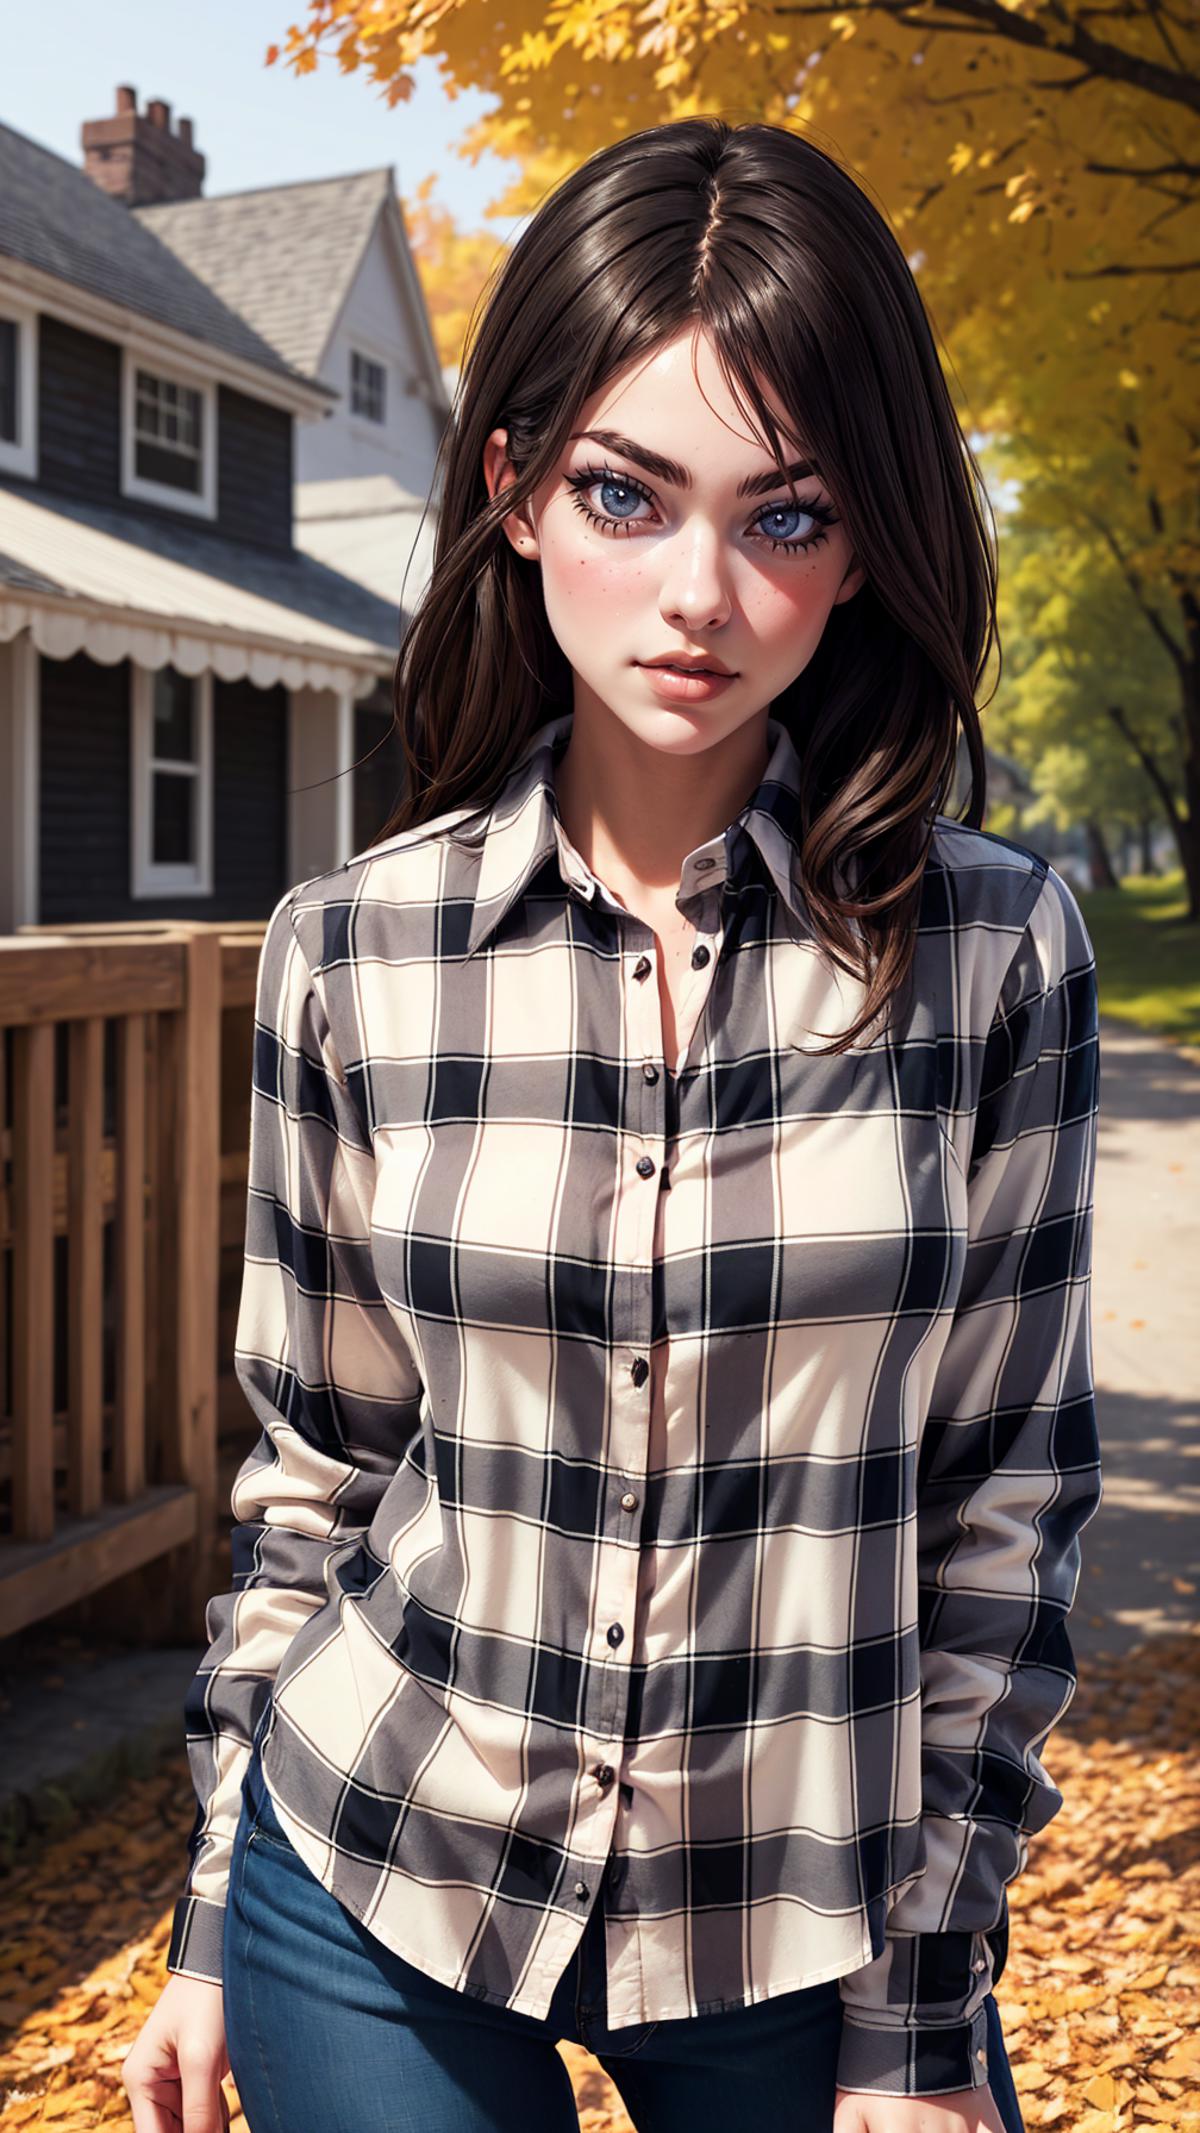 The image features a woman with long brown hair, dressed in a plaid shirt with a collar, and blue eyes. She is posing for the camera, and her outfit is complemented by a matching plaid tie. The woman appears to be in front of a house, and the scene is captured in a 3D rendering. The overall atmosphere suggests a stylish and confident pose.